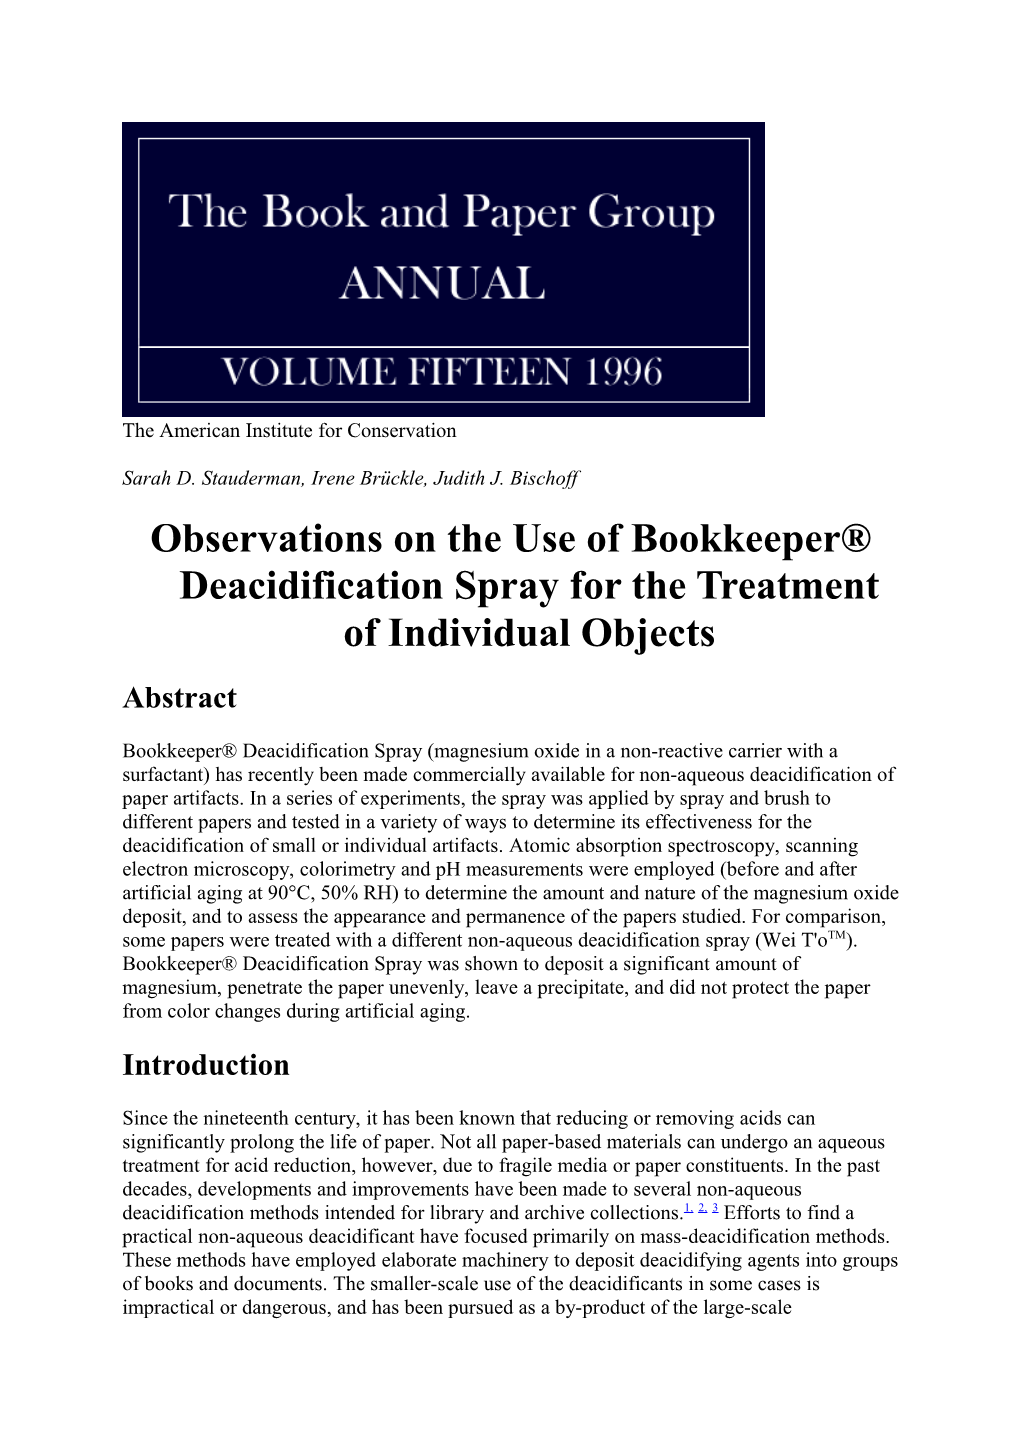 Observations on the Use of Bookkeeper Deacidification Spray for the Treatment of Individual